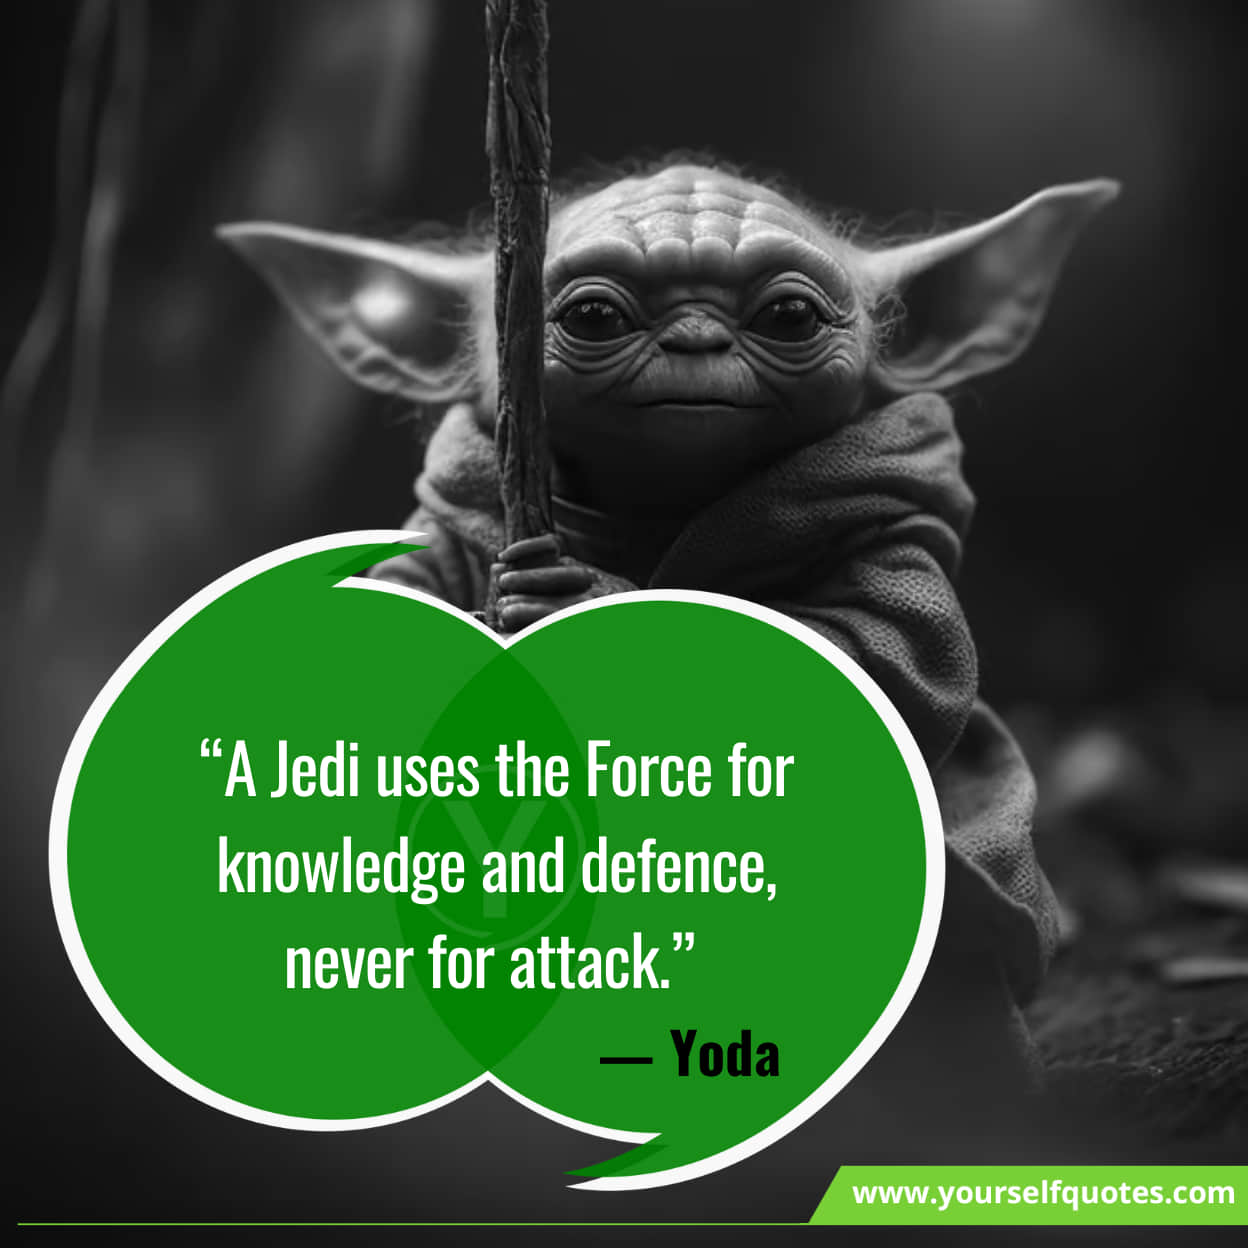 Yoda Quotes To Get Success